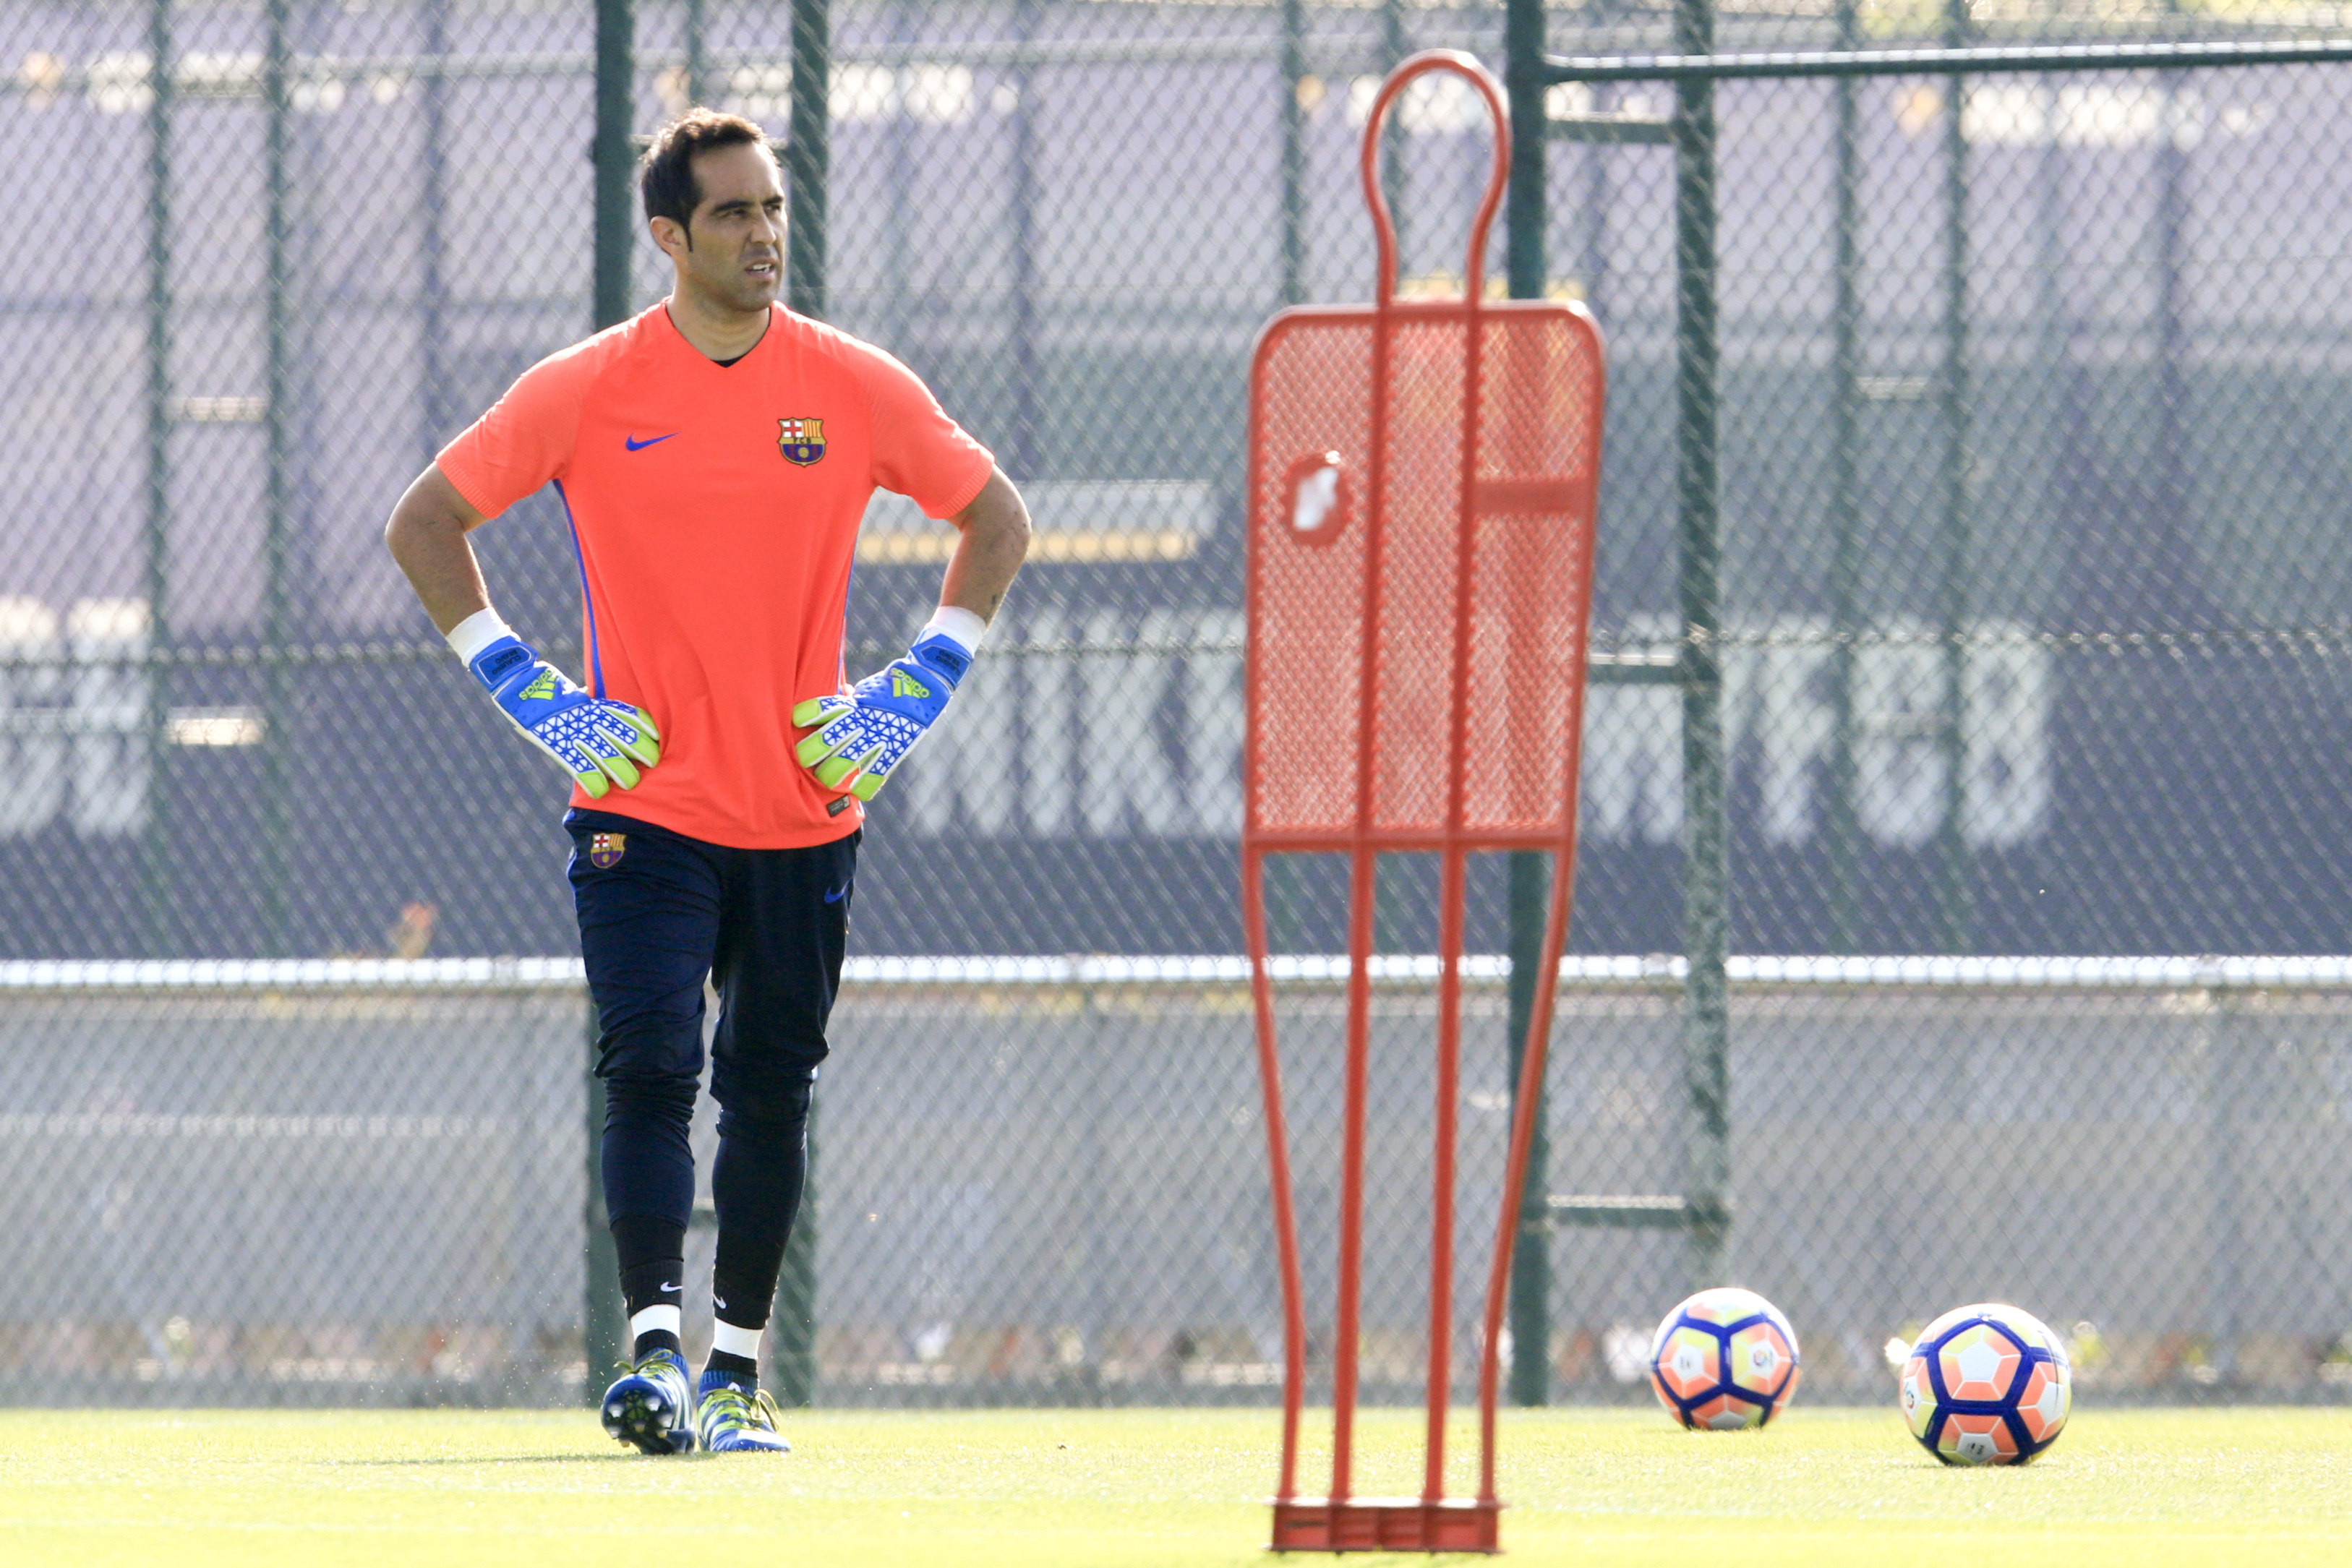 Barcelona's Chilean goalkeeper Claudio Bravo looks on during a training session at the Sports Center FC Barcelona Joan Gamper in Sant Joan Despi, near Barcelona on August 19, 2016 / AFP / PAU BARRENA        (Photo credit should read PAU BARRENA/AFP/Getty Images)